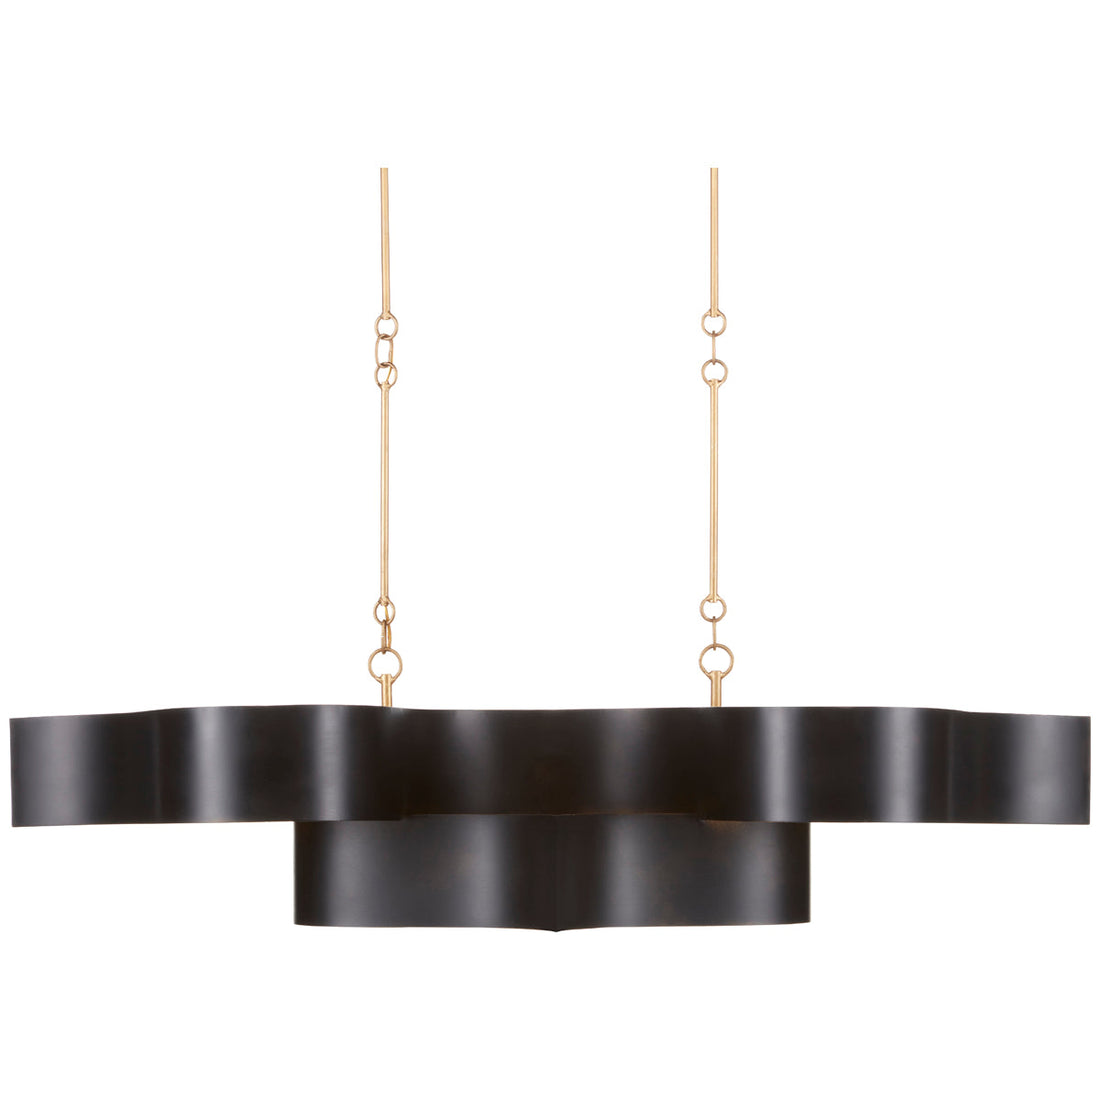 Currey and Company Grand Lotus Oval Chandelier